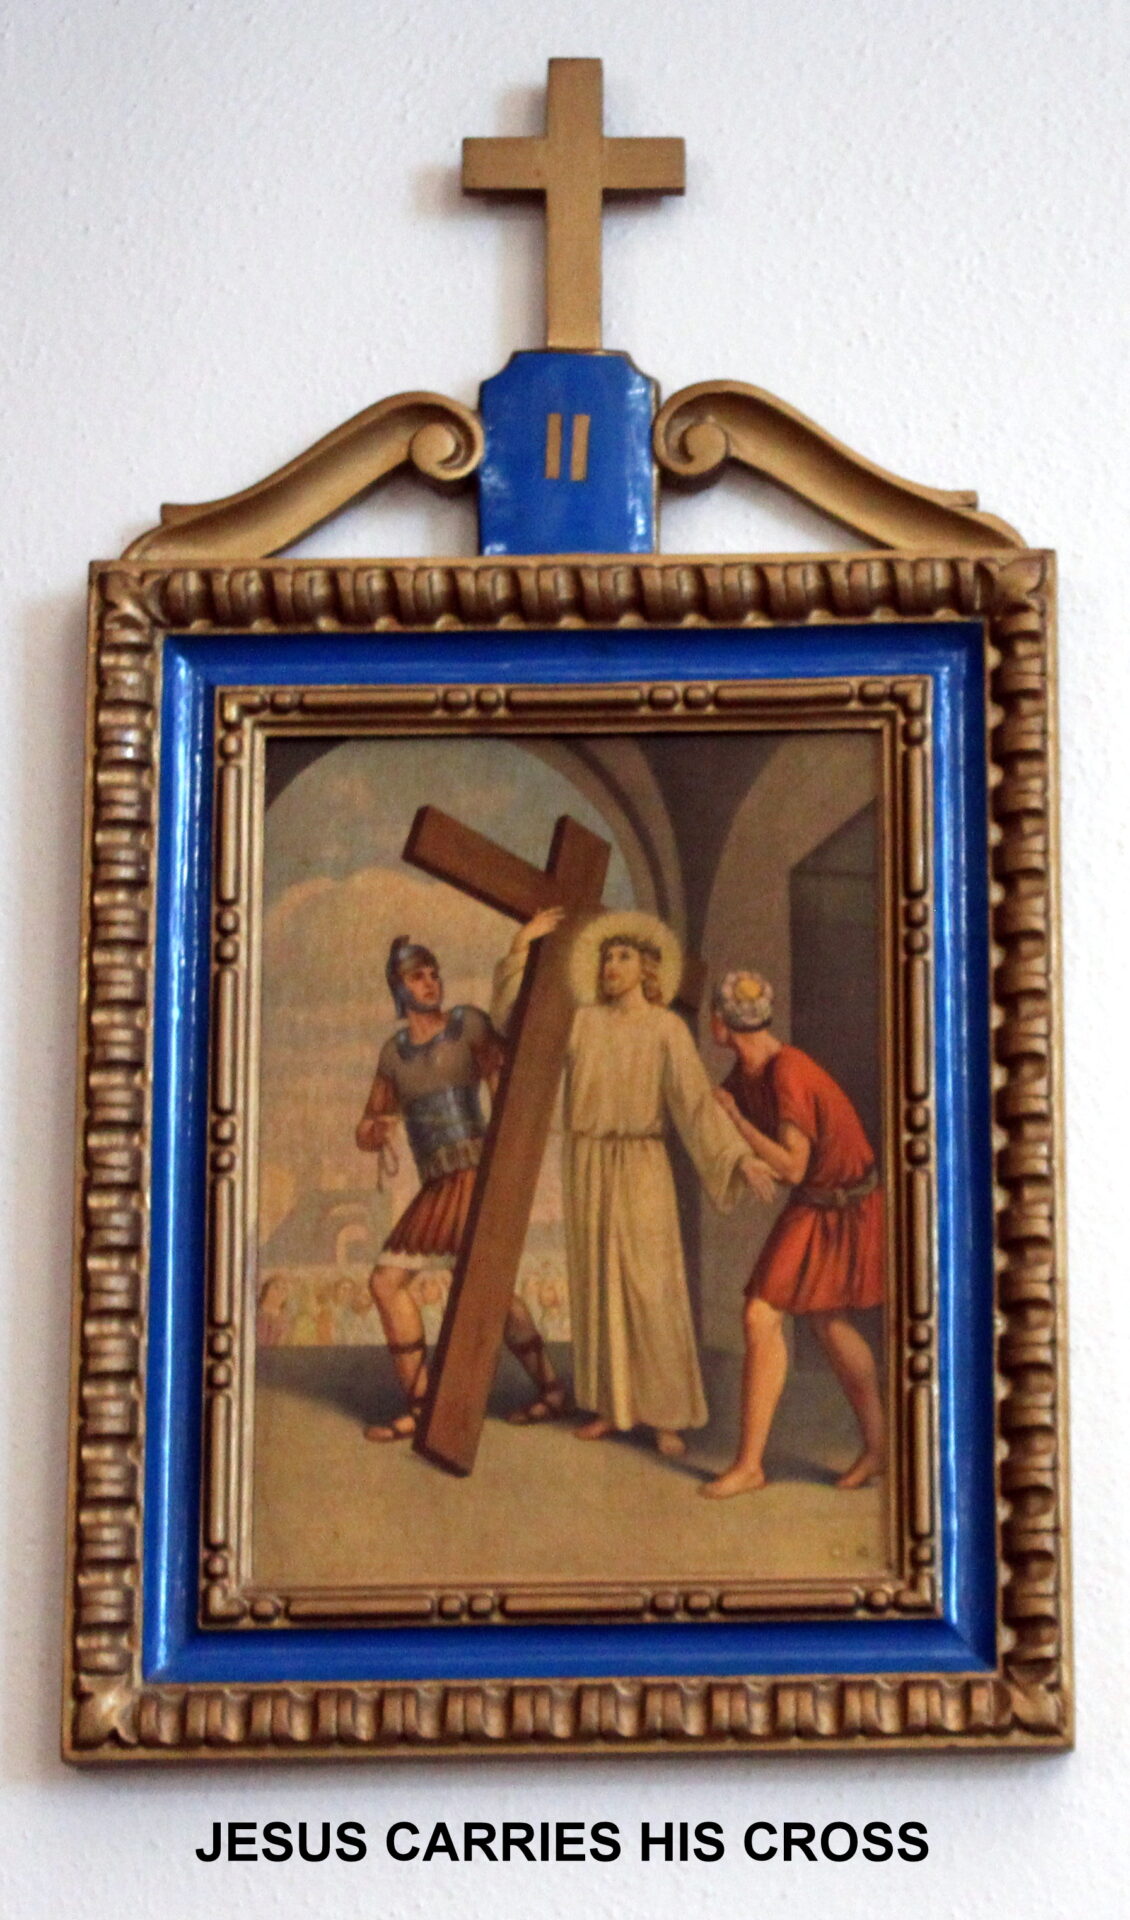 The second chapter of the station of the cross